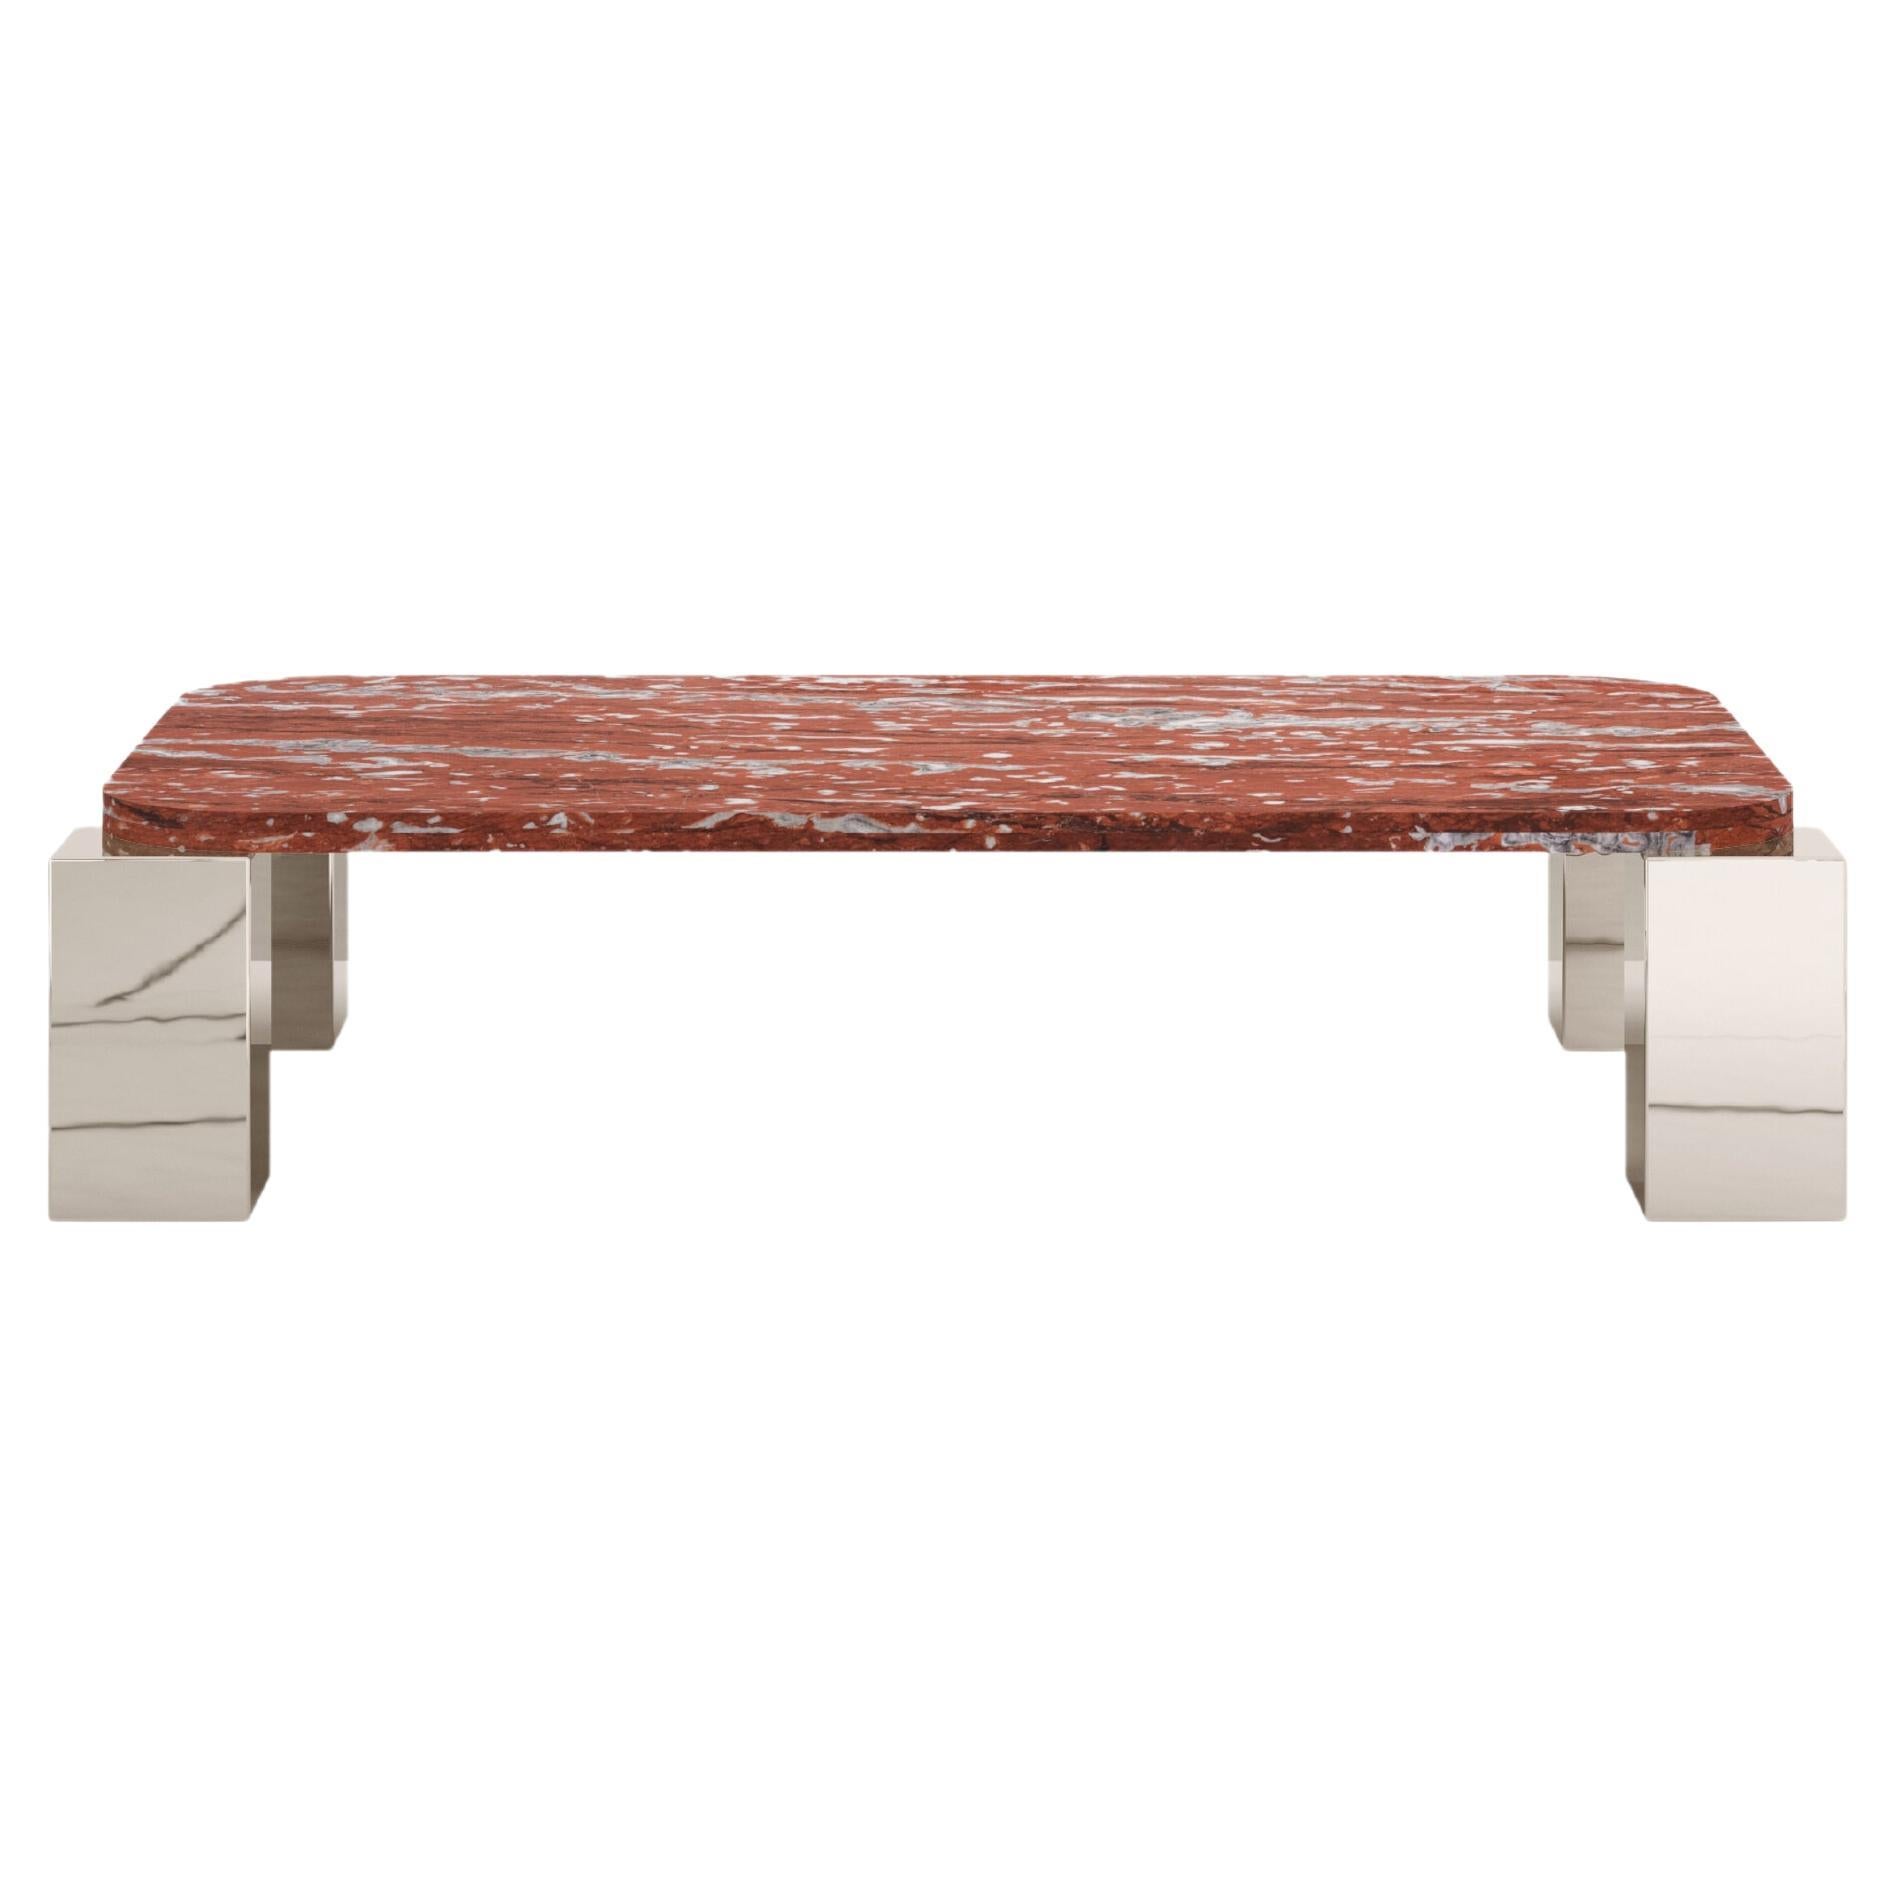 FORM(LA) Cubo Rectangle Coffee Table 74”L x 44”W x 14”H Francia Marble & Chrome For Sale